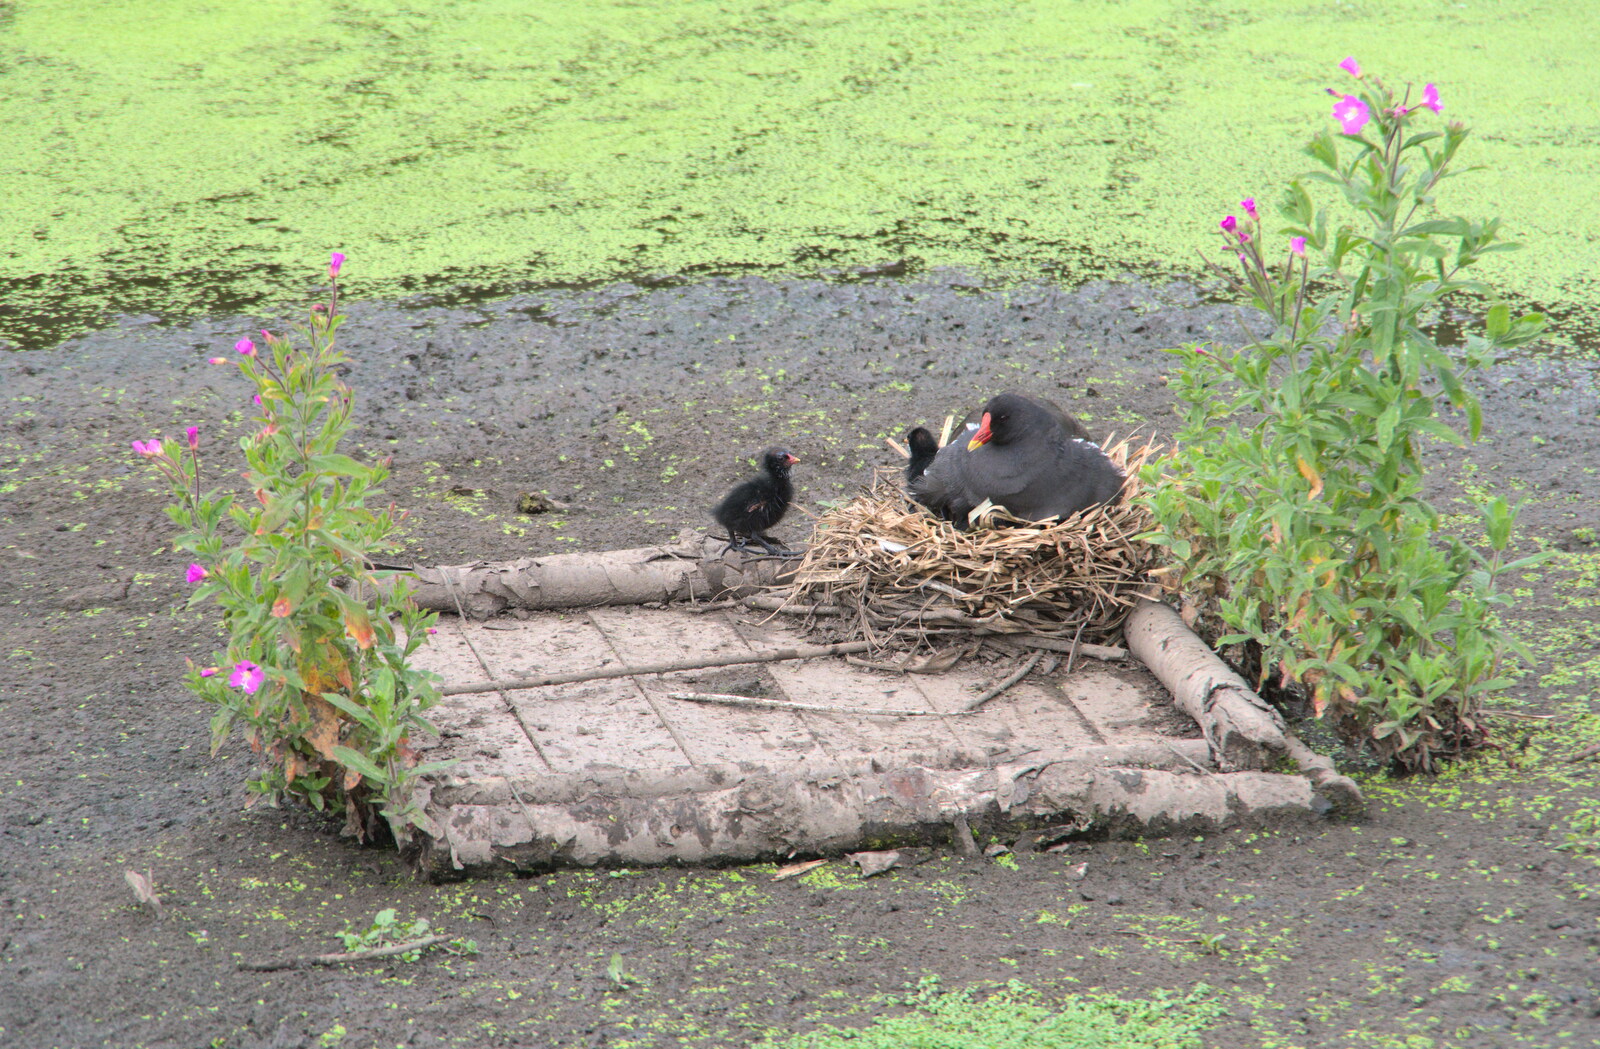 A moorhen and chicks on a pond from Camping on the Coast, East Runton, North Norfolk - 25th July 2020